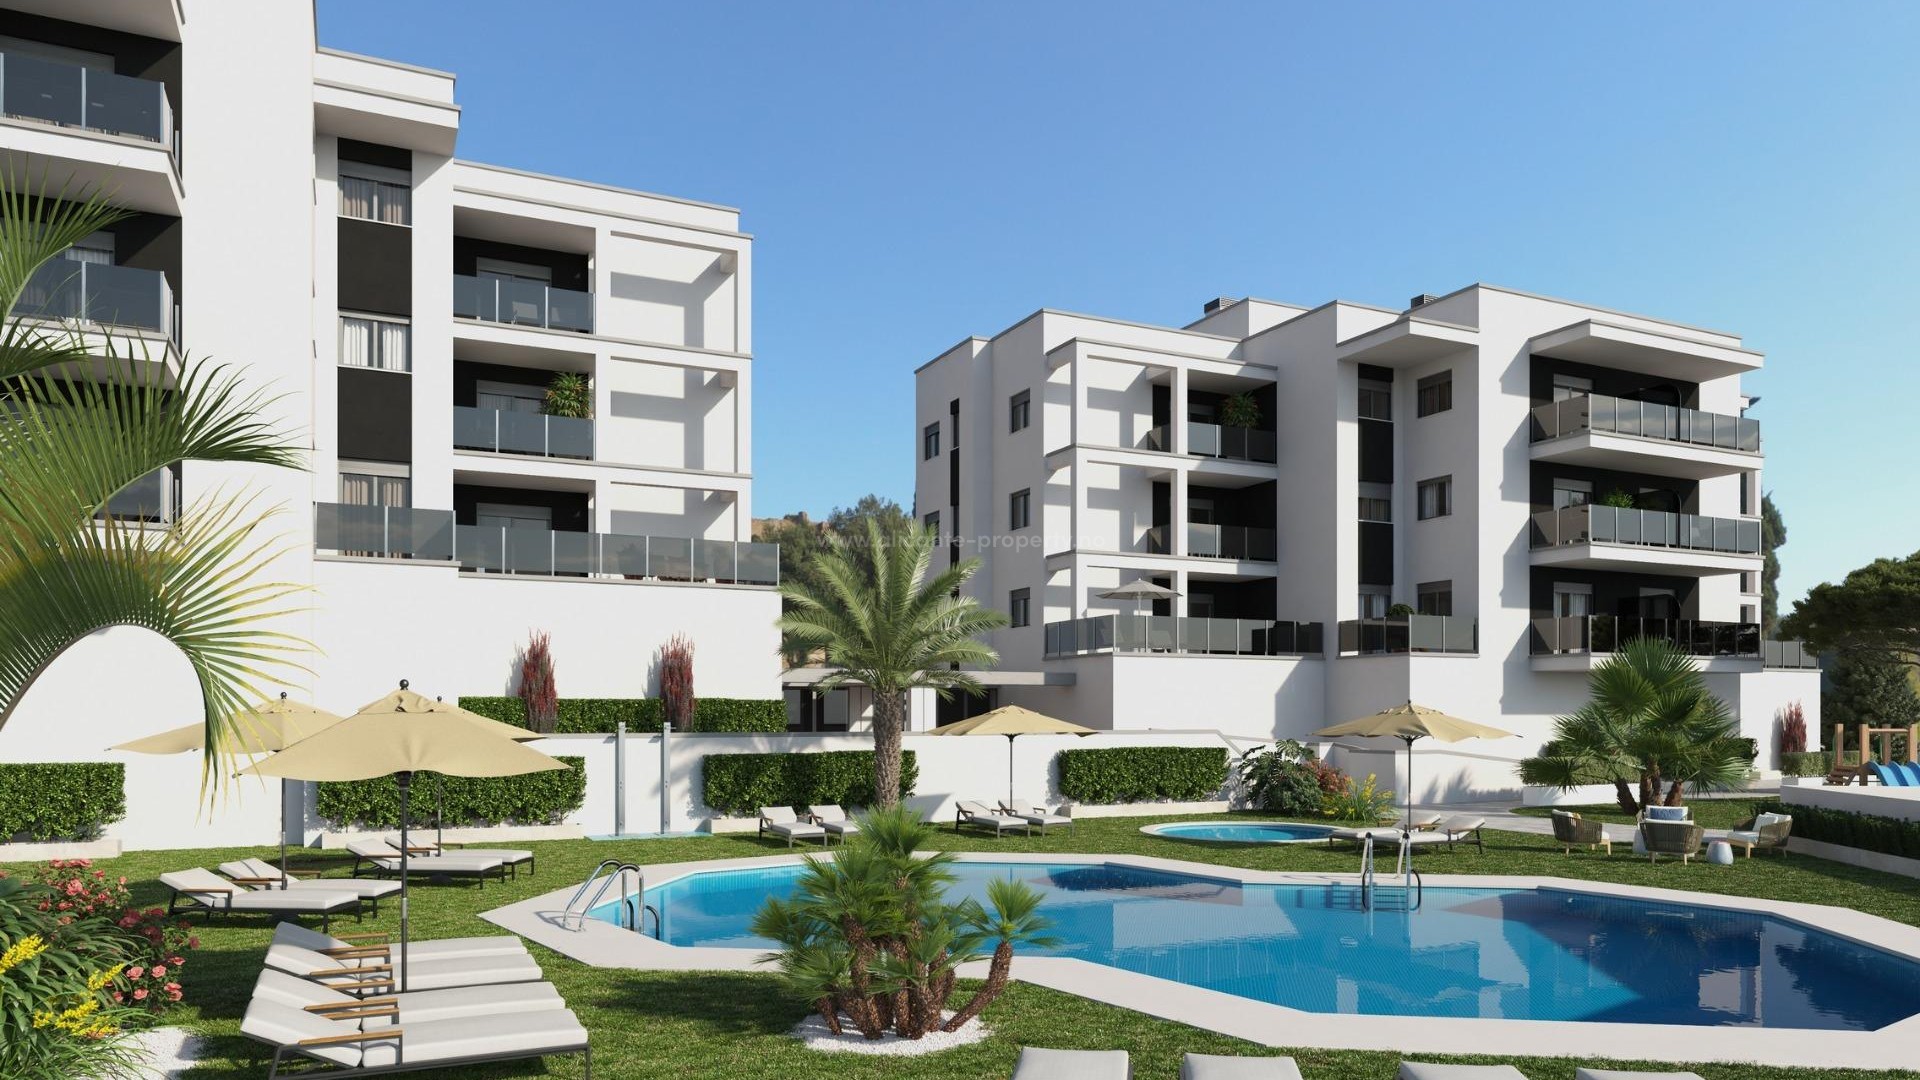 Brand new residential complex with apartments/penthouses in Villajoyosa, 2/3 bedrooms, 2 bathrooms, terraces, communal areas with pool, all with parking